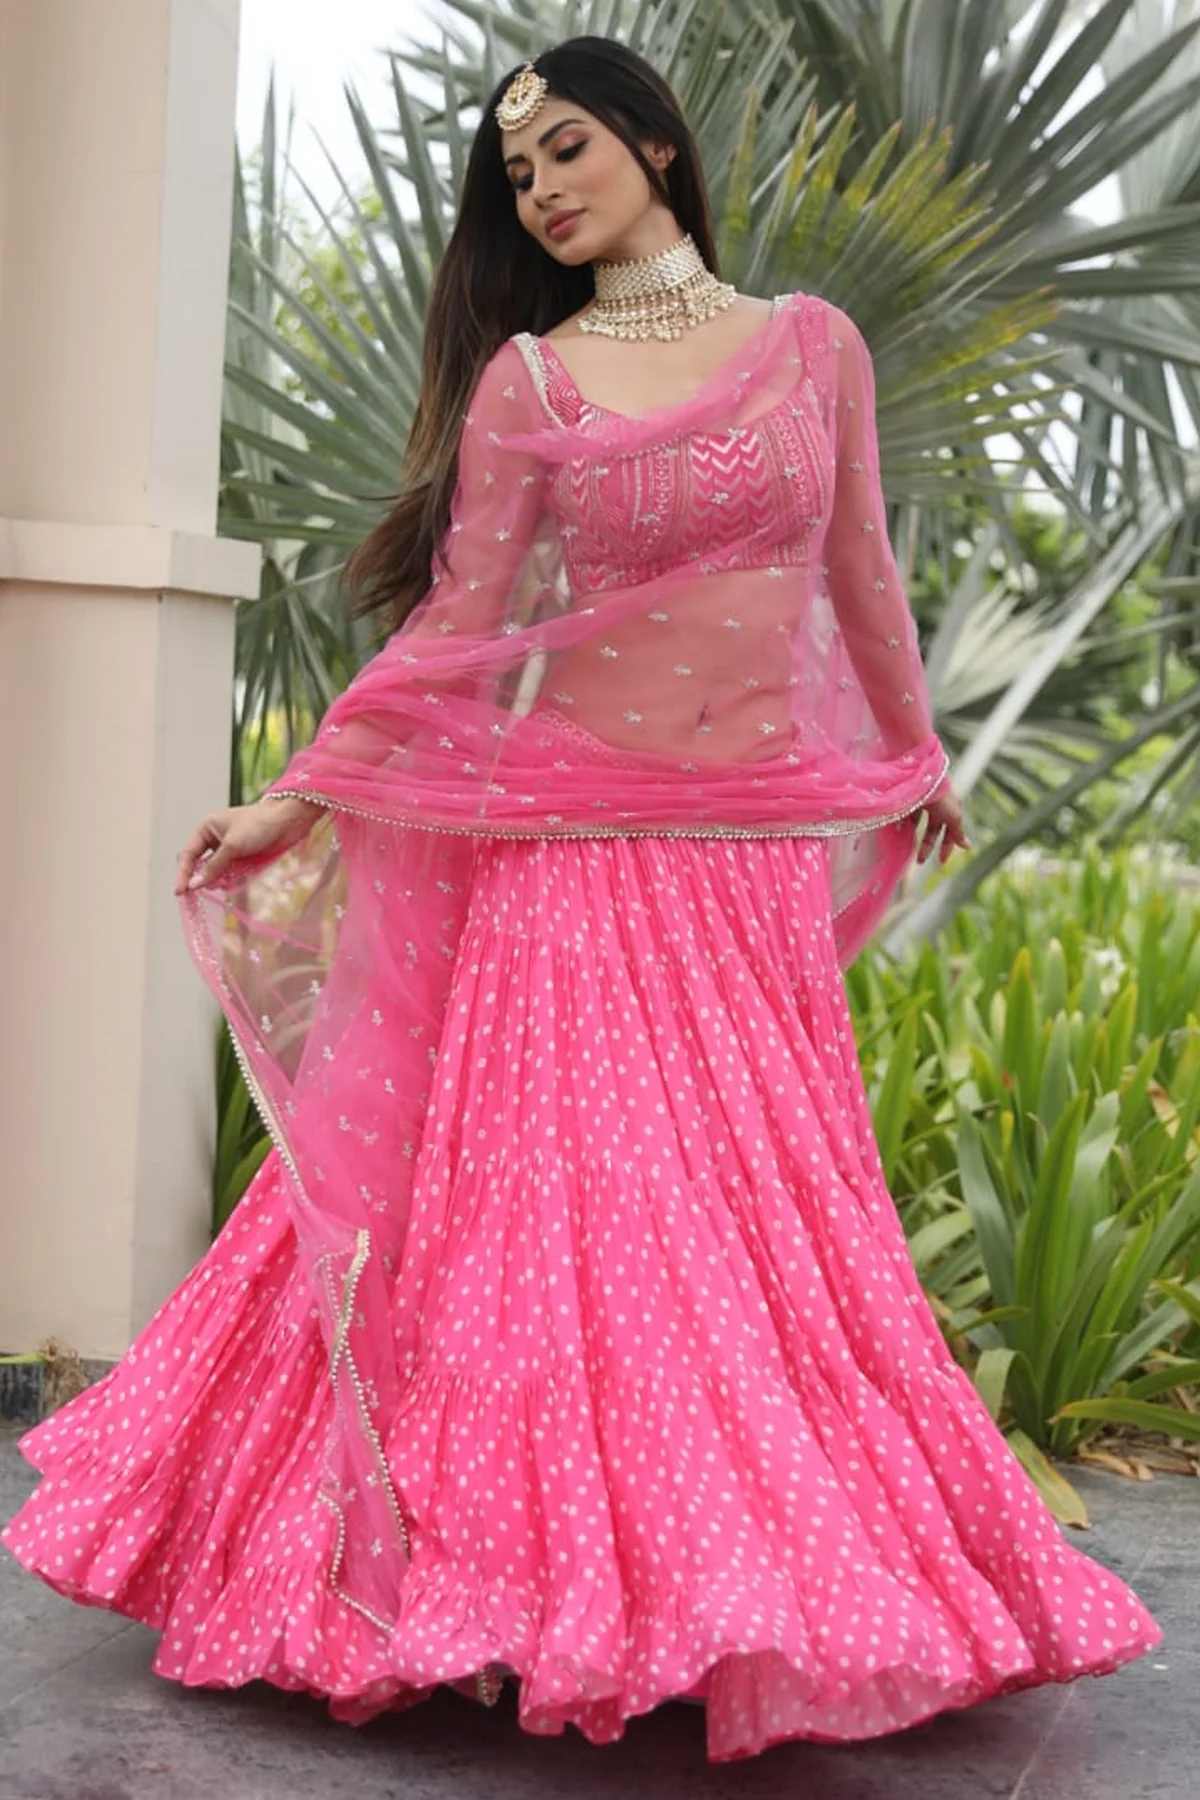 13 Shades Of Pink That Will Turn Every Bride Into A Barbie